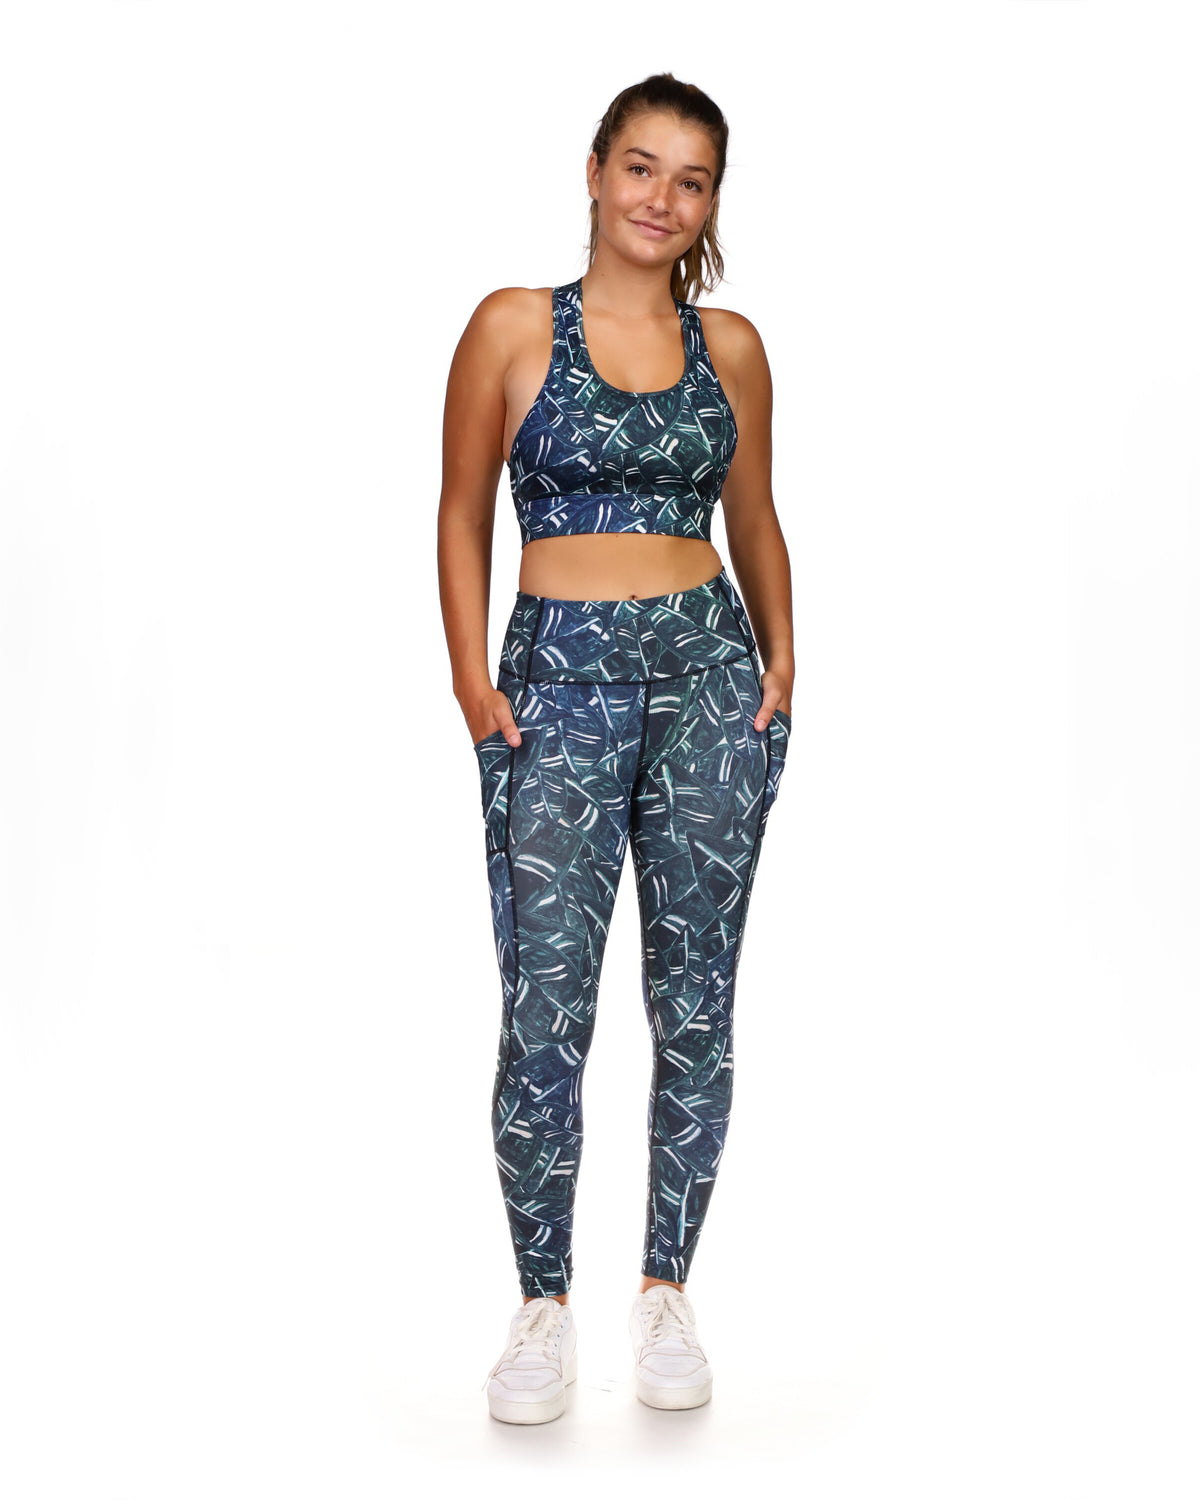 All-Over-Print Full-Length Legging With Pockets - Daisy Teal - Body Glove